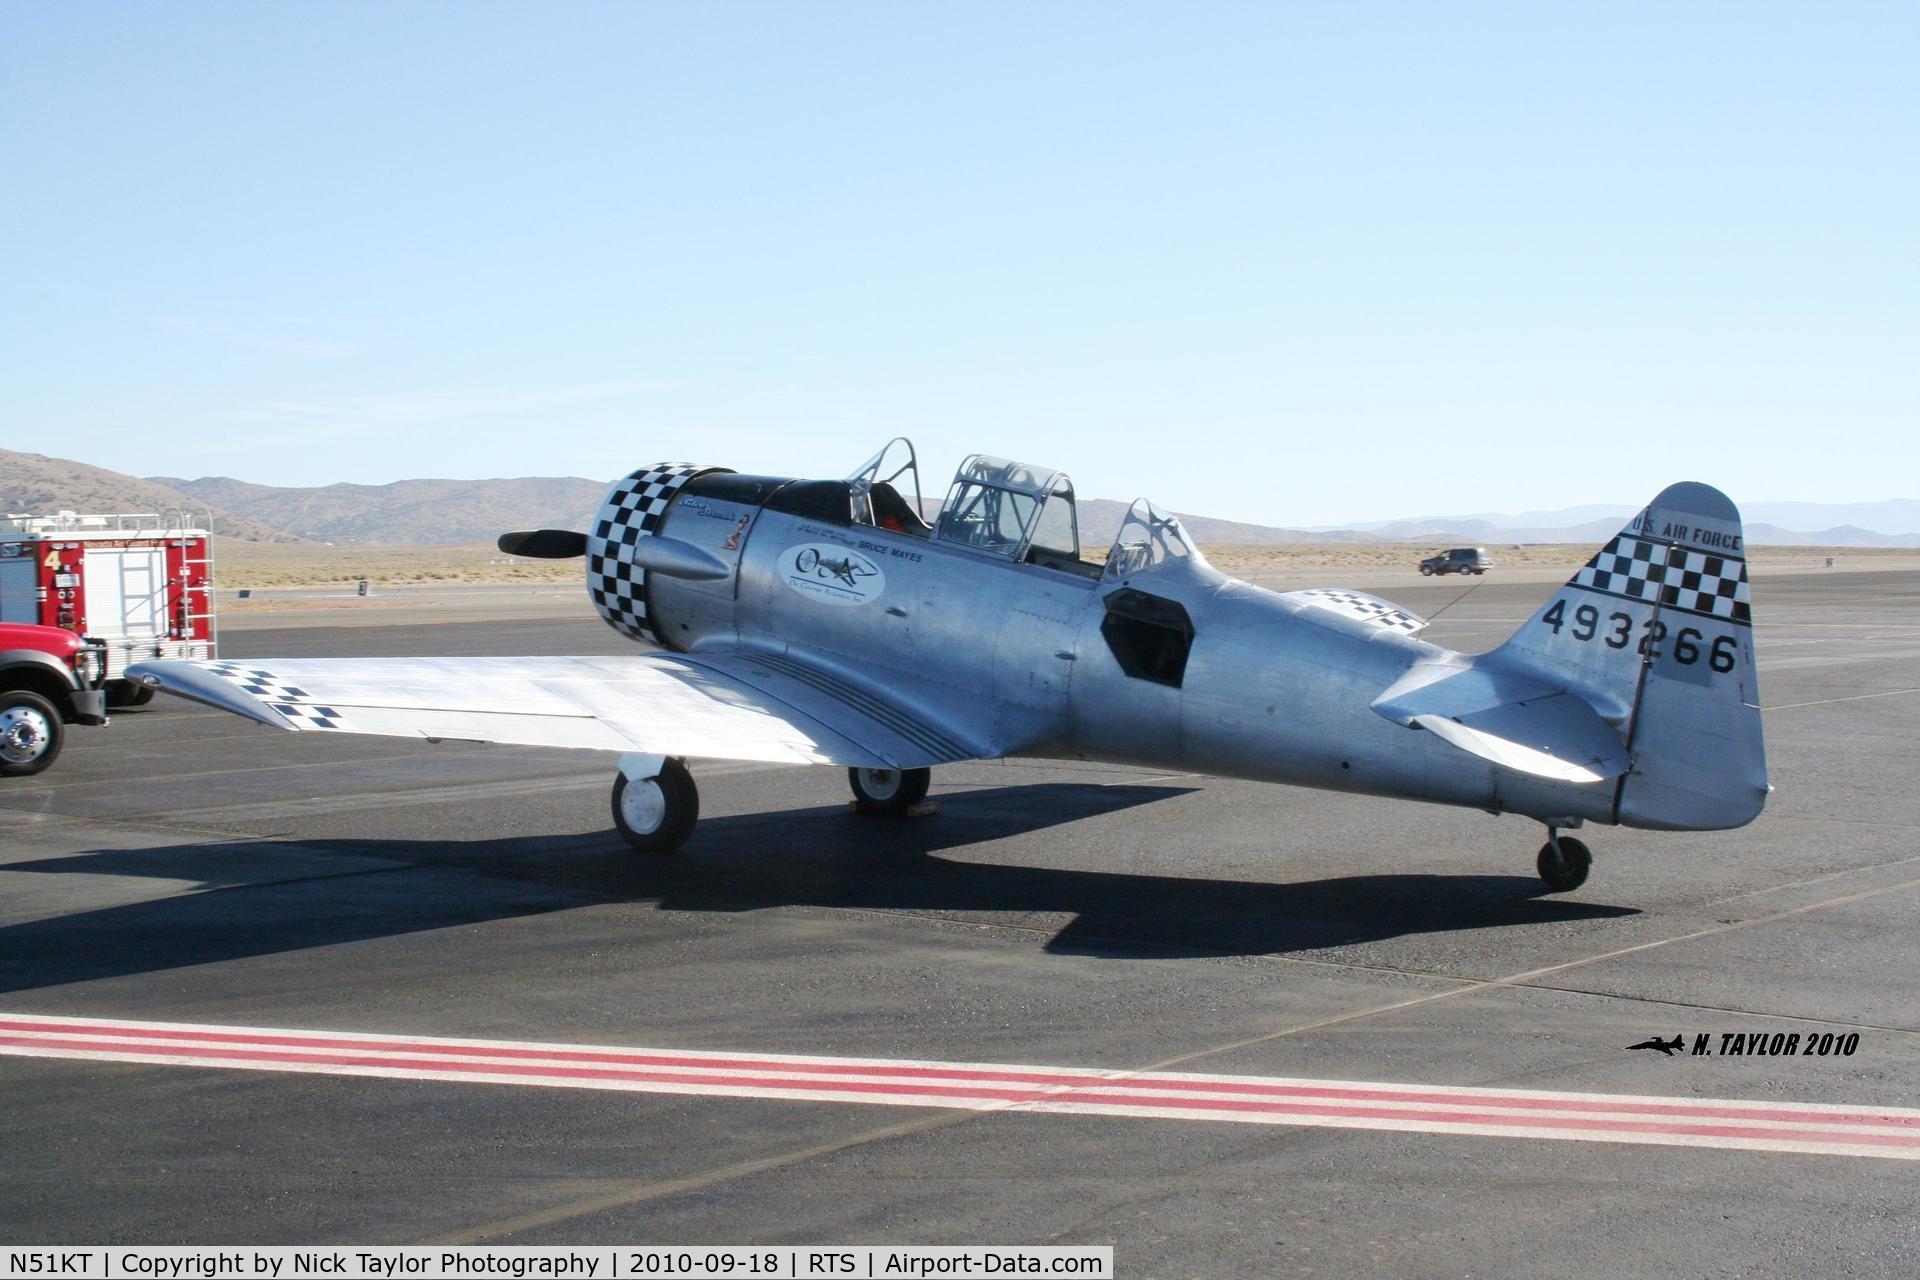 N51KT, 1951 North American T-6G Texan C/N 168-370, Parked on the ramp. Who knew 2 months later I would fly this bird.